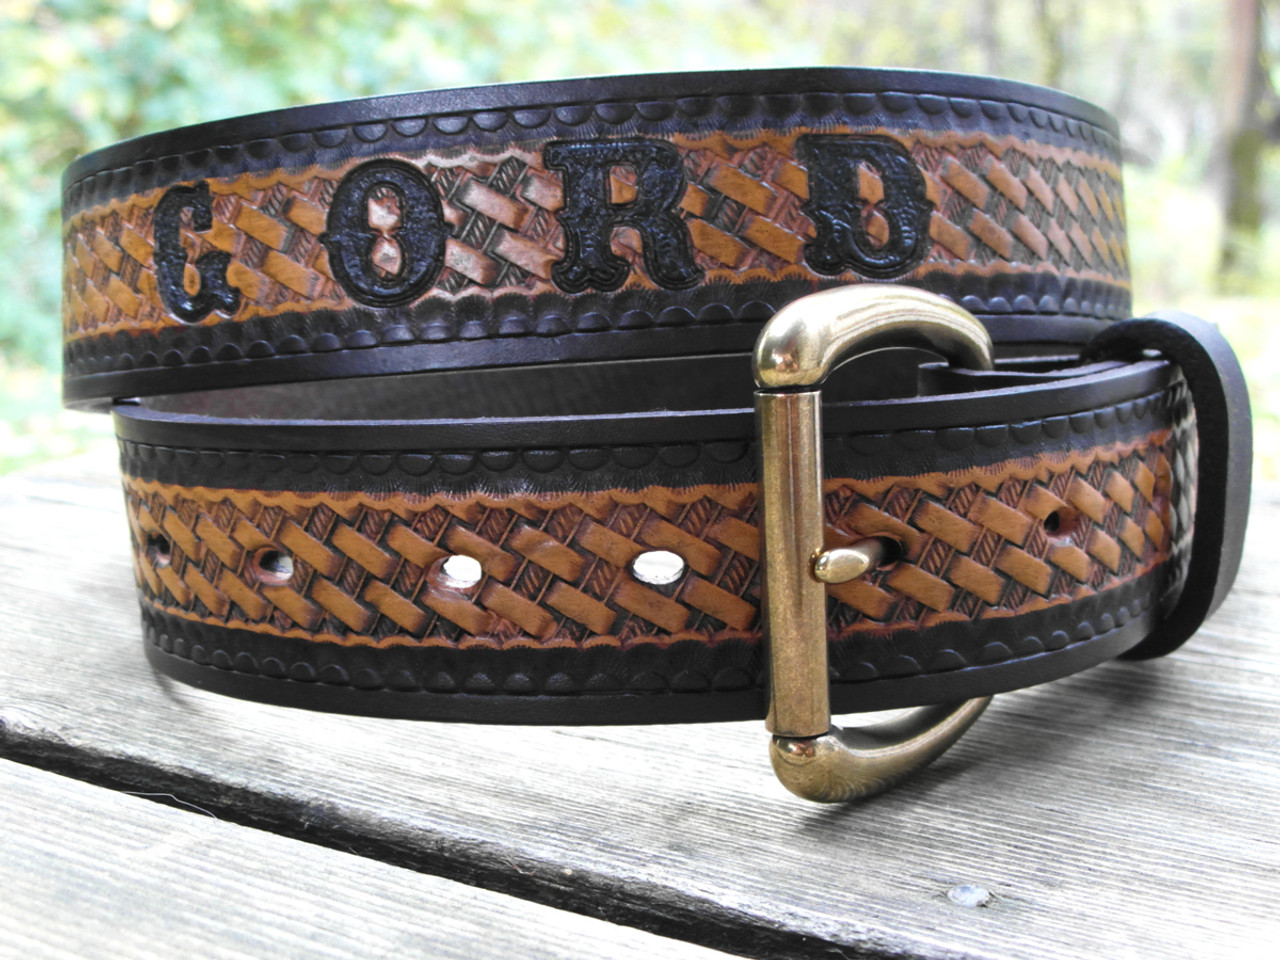 Personalized Fancy Cut-Out Leather Name Belt - Peronalized Custom Handmade Leather Belt Natural Leather w/ Painted Nature Scene / Half Oval - Brass